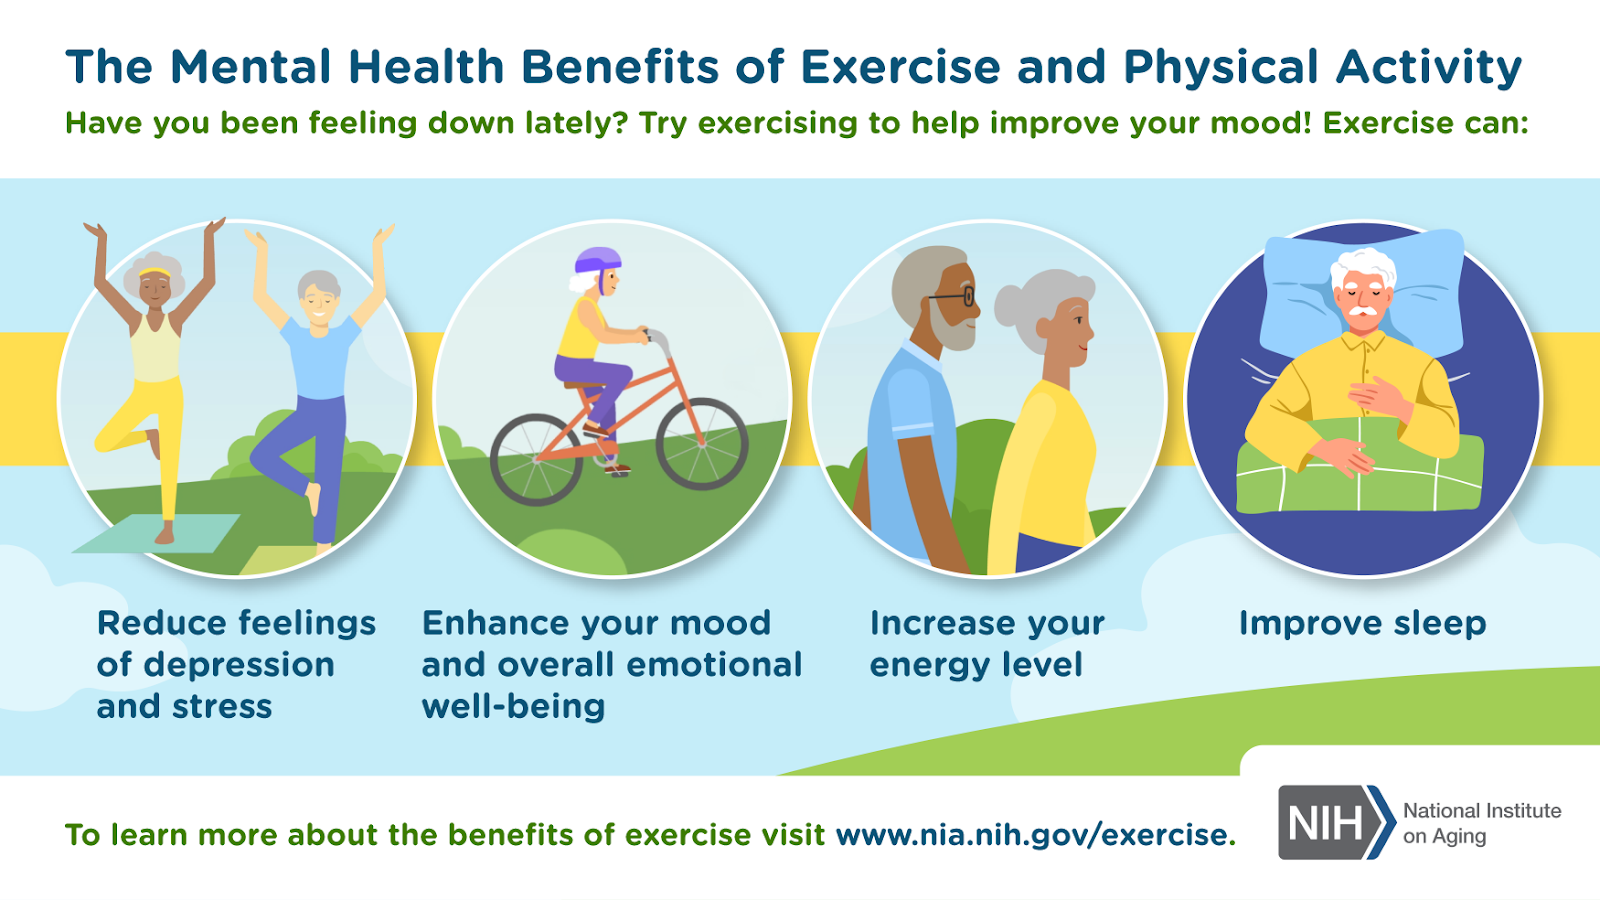 The Mental Health Benefits of Exercise and Physical Activity infographic. Open PDF for full transcript.